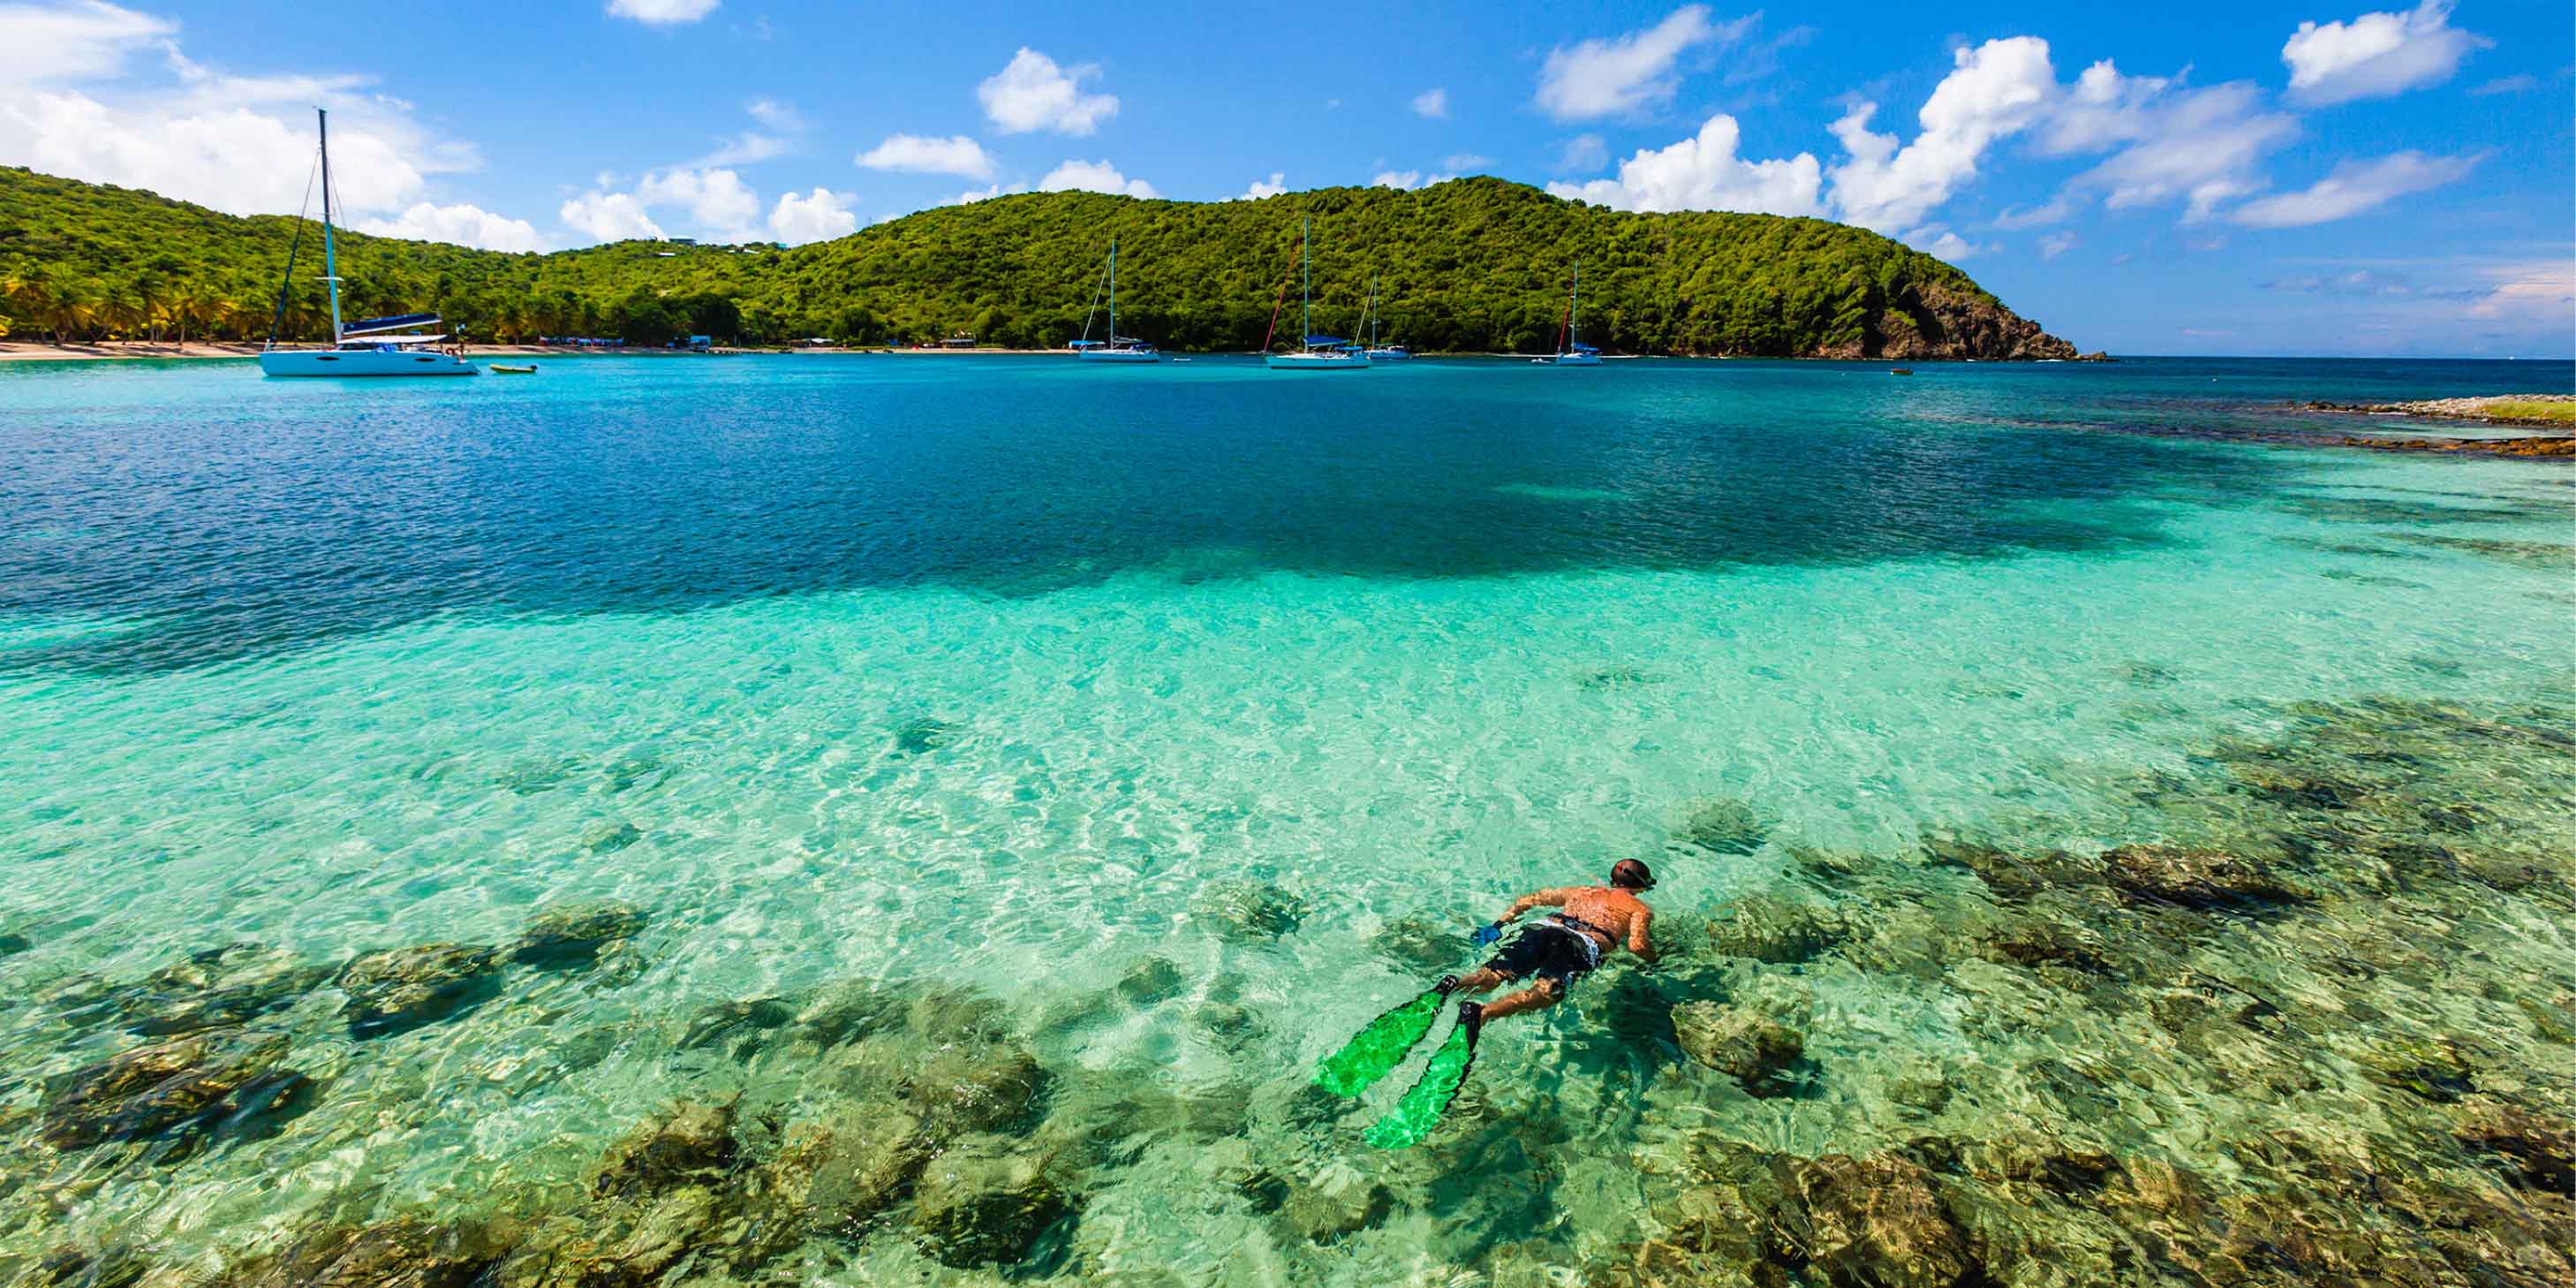 a person snorkelling in clear water with a green island in the background